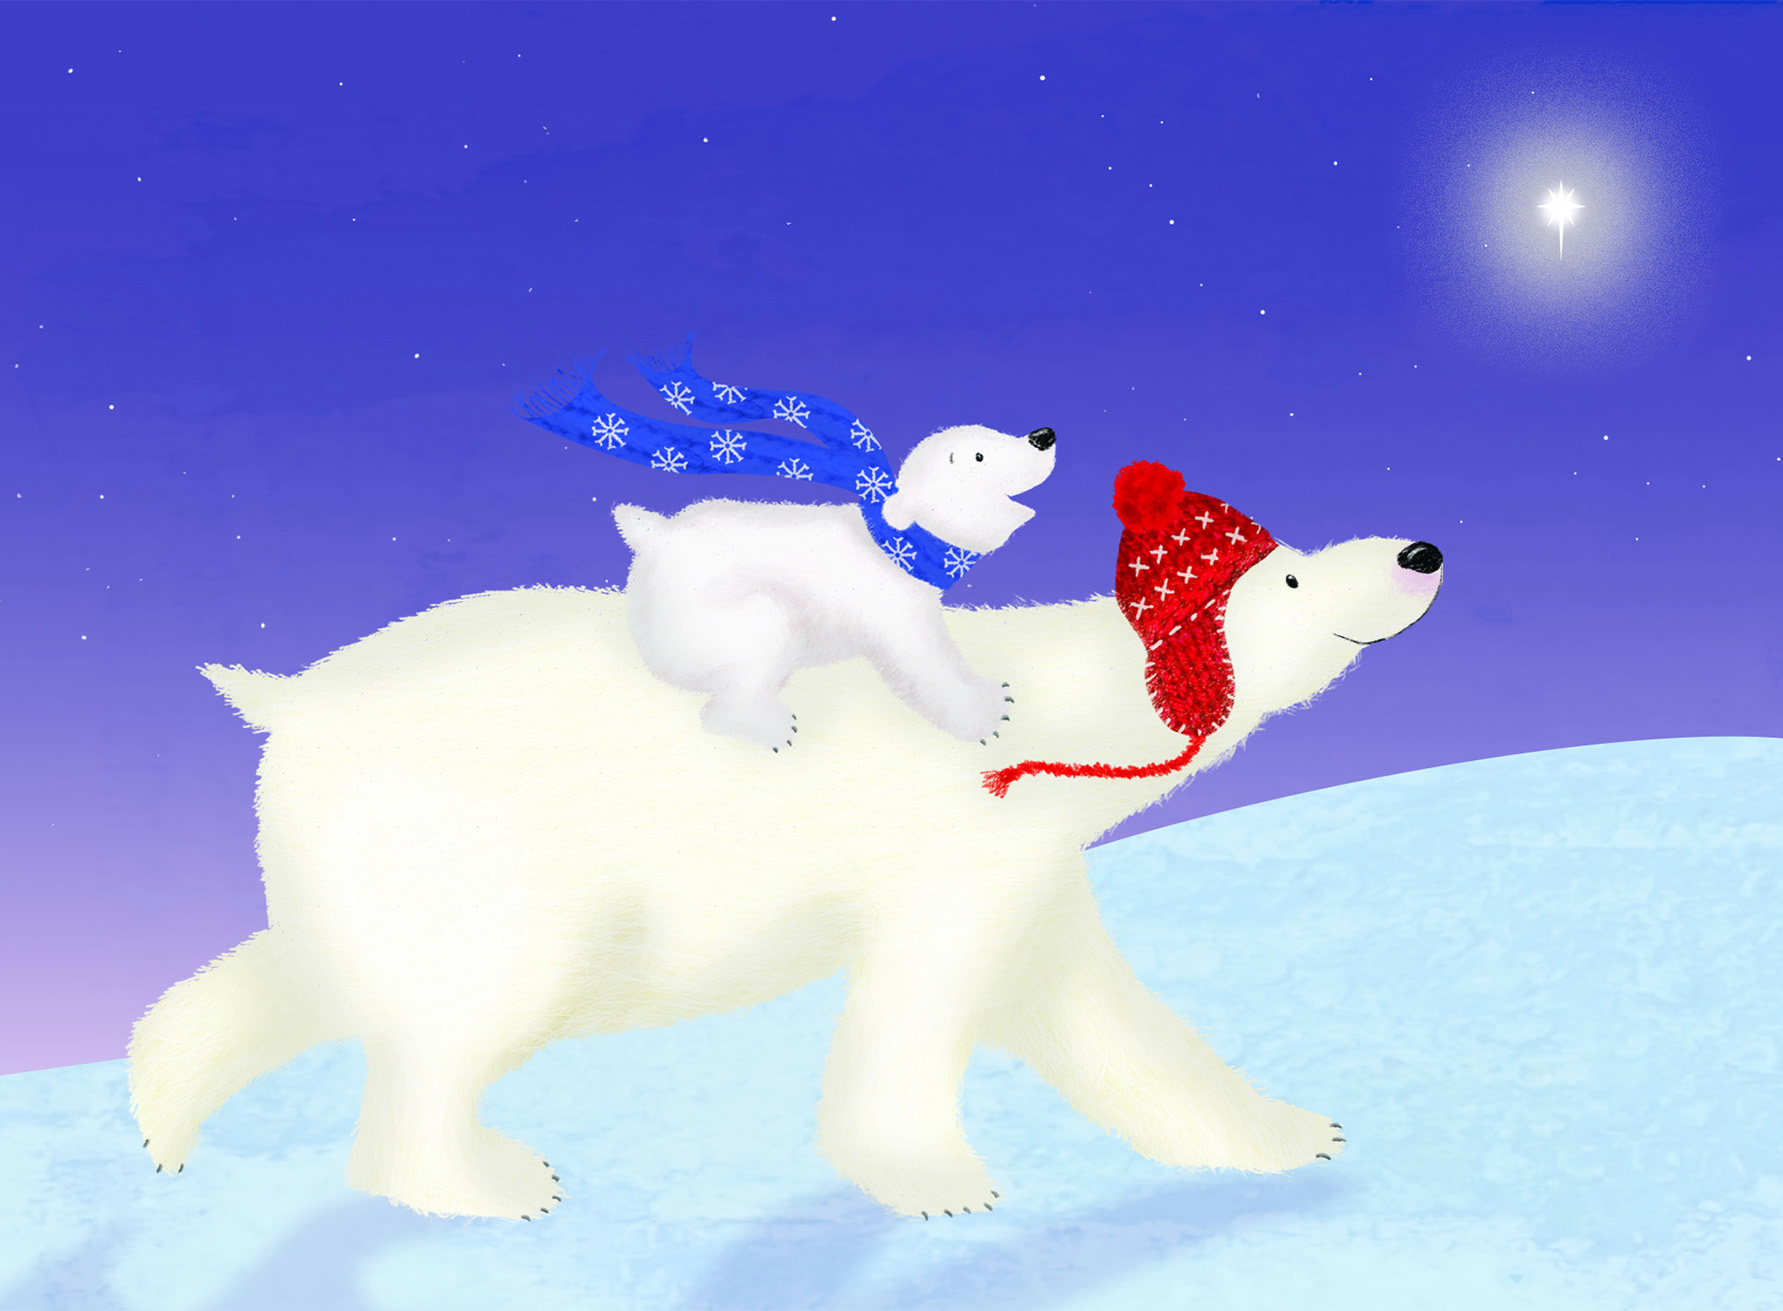 Polar bear with a cub on her back, crossing a frozen landscape at night with a bright star shining above them